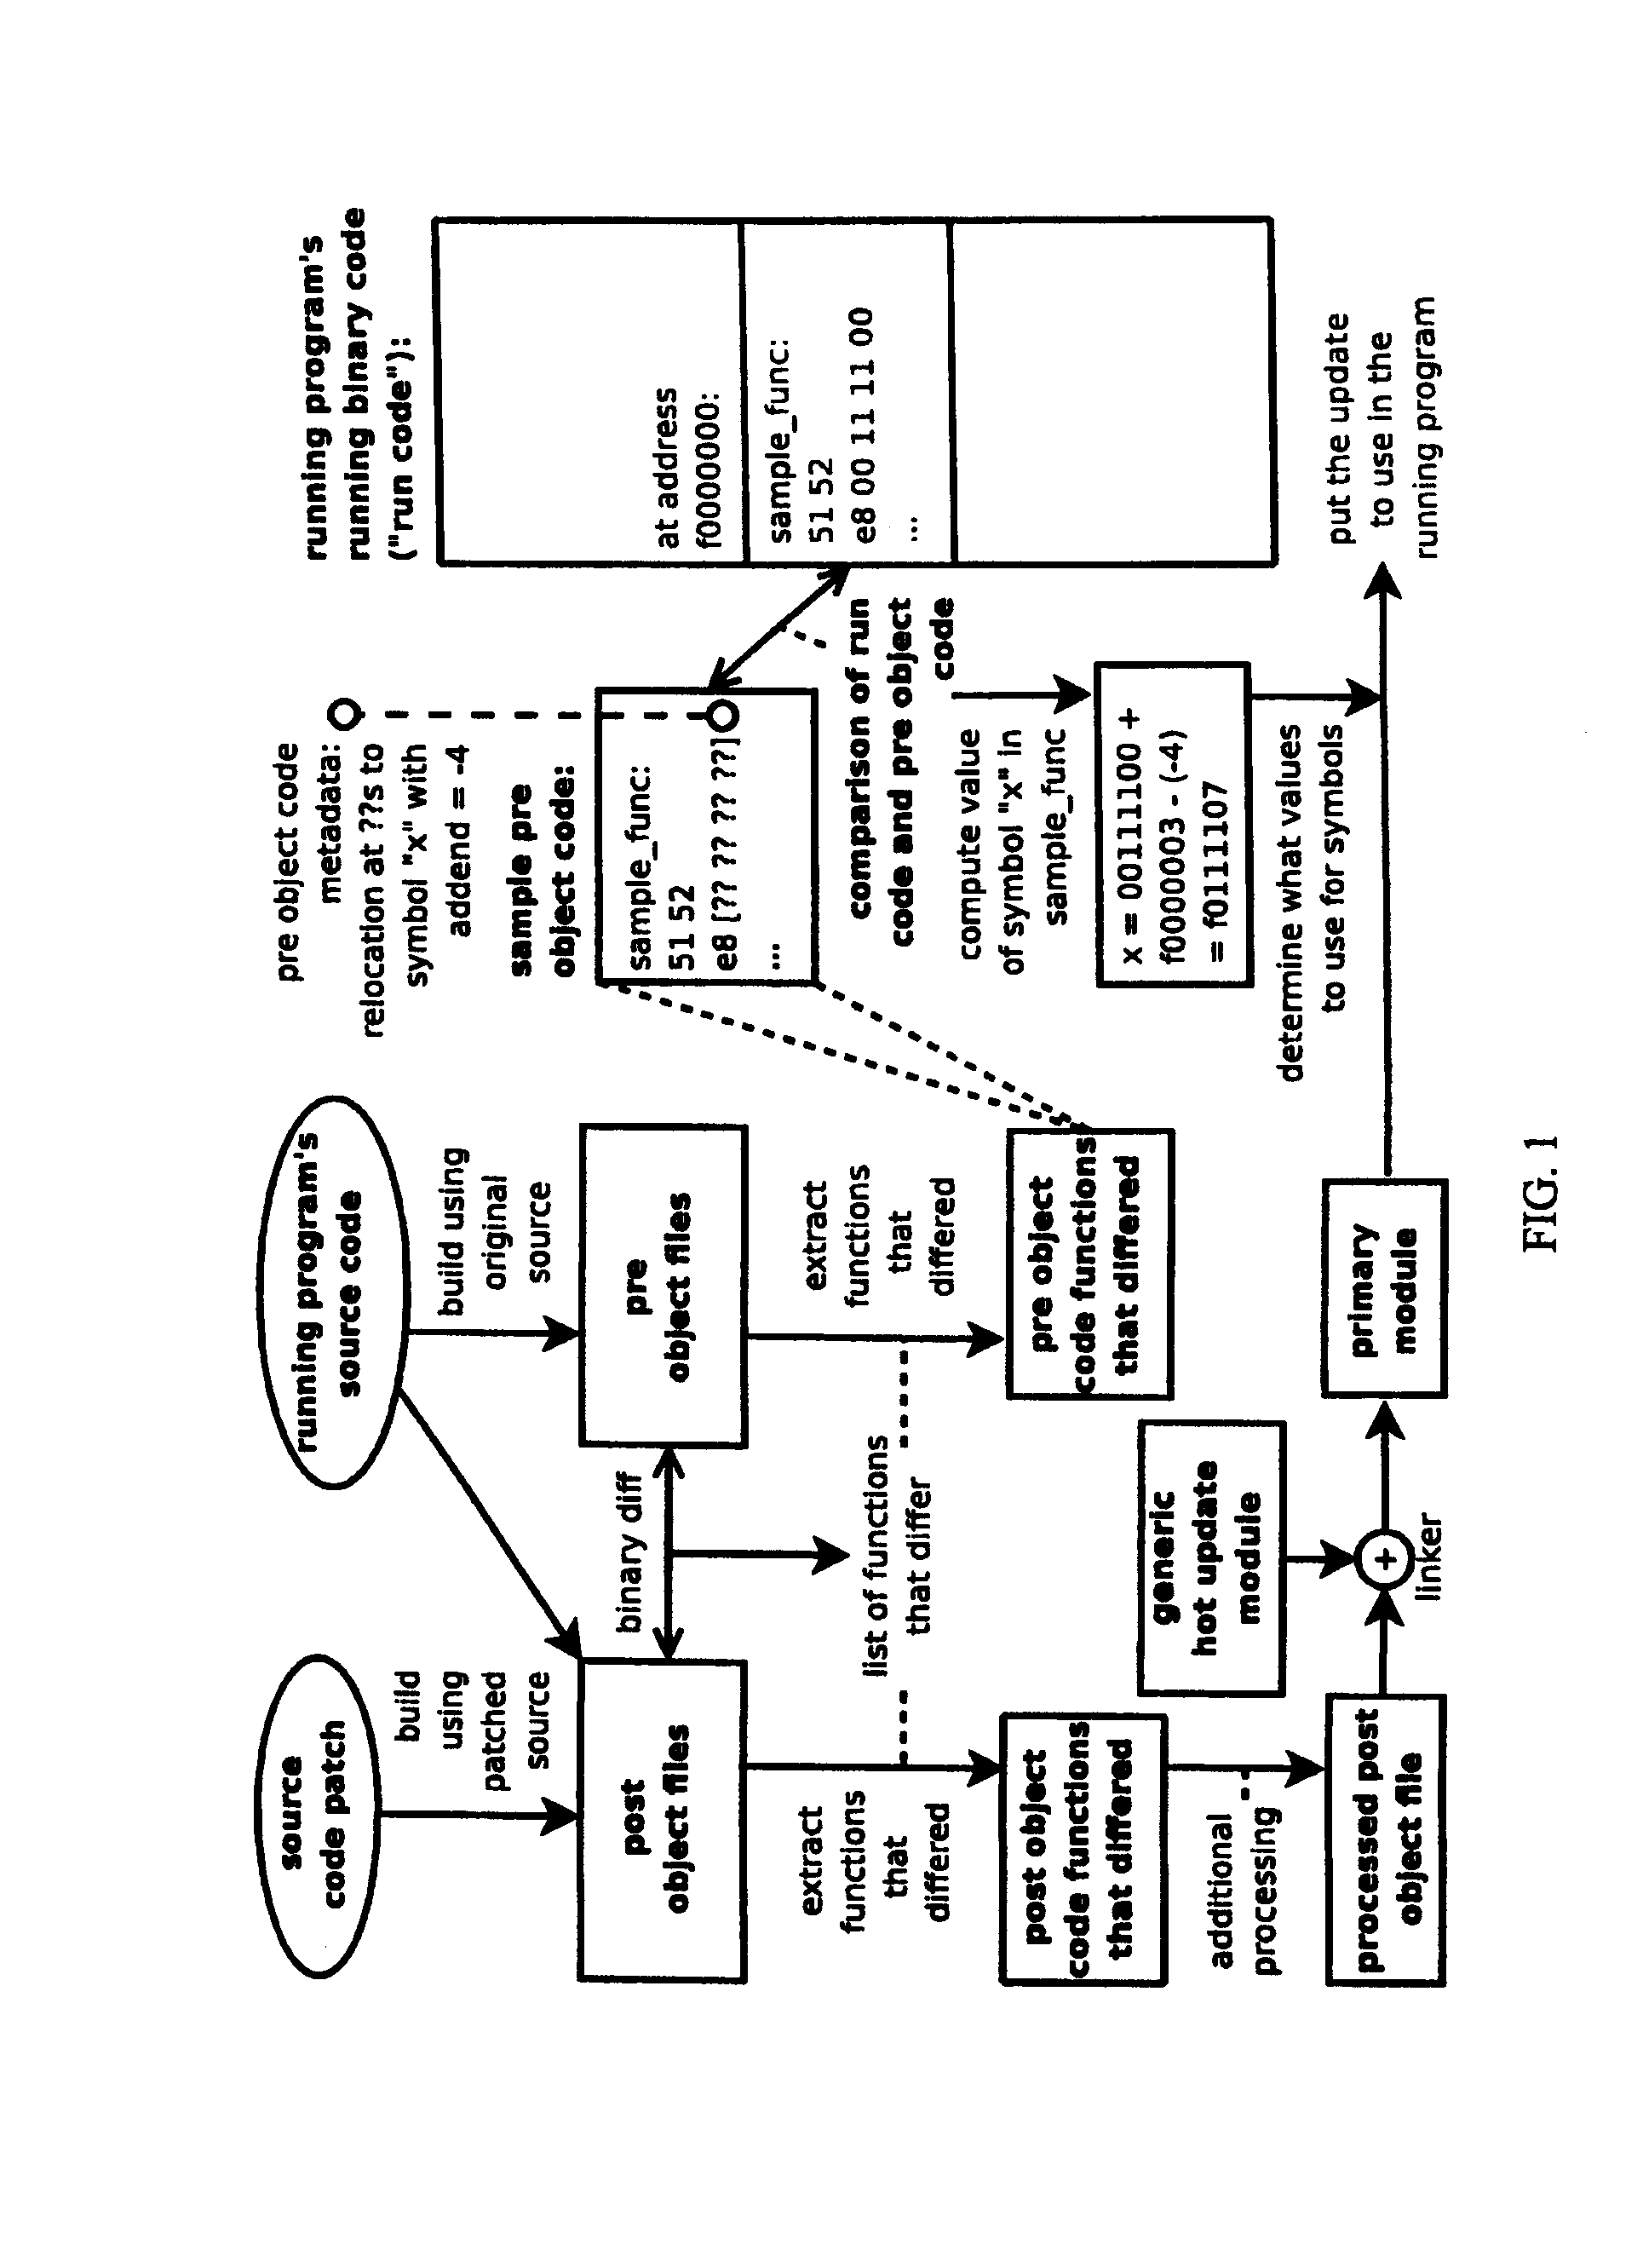 Method of modifying code of a running computer program based on symbol values discovered from comparison of running code to corresponding object code